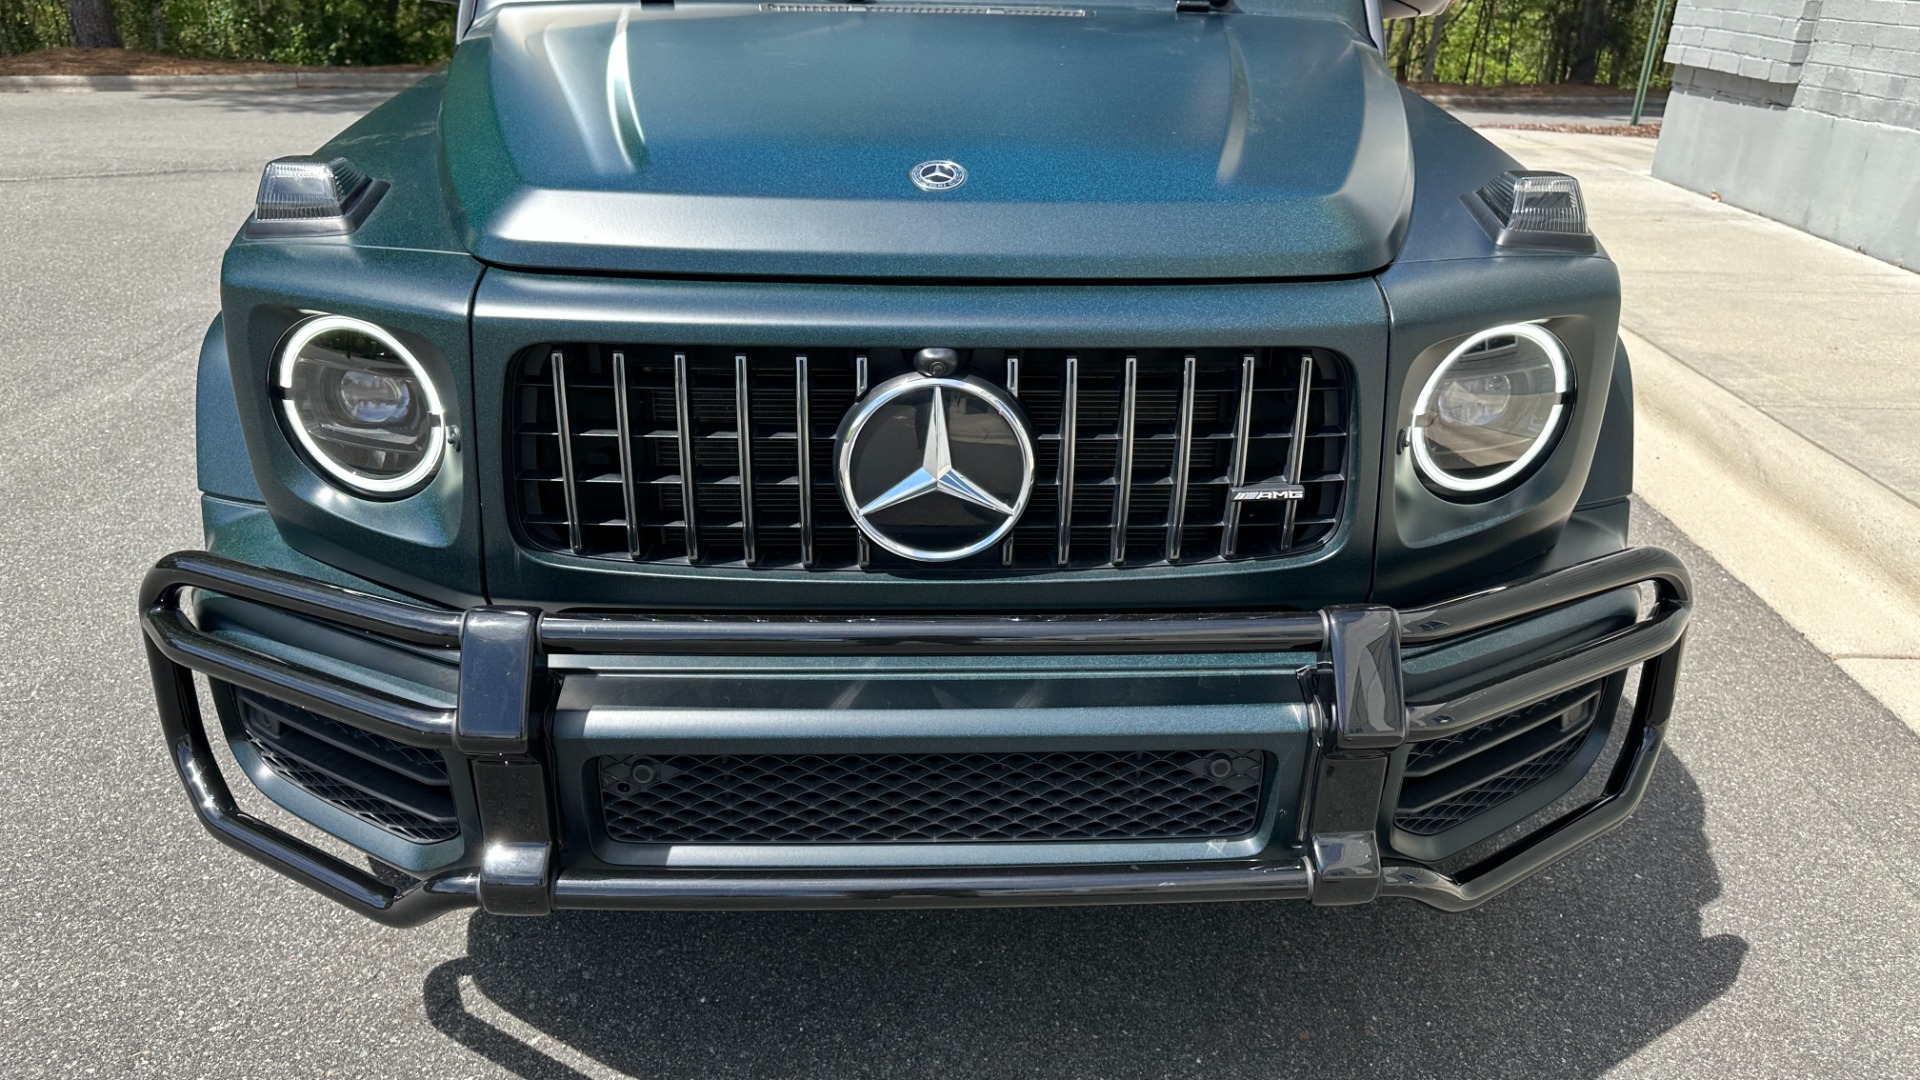 Used 2020 Mercedes-Benz G-Class AMG G63 DESIGNO INTERIOR / AMG NIGHT PKG / CARBON FIBER TRIM for sale $165,999 at Formula Imports in Charlotte NC 28227 9